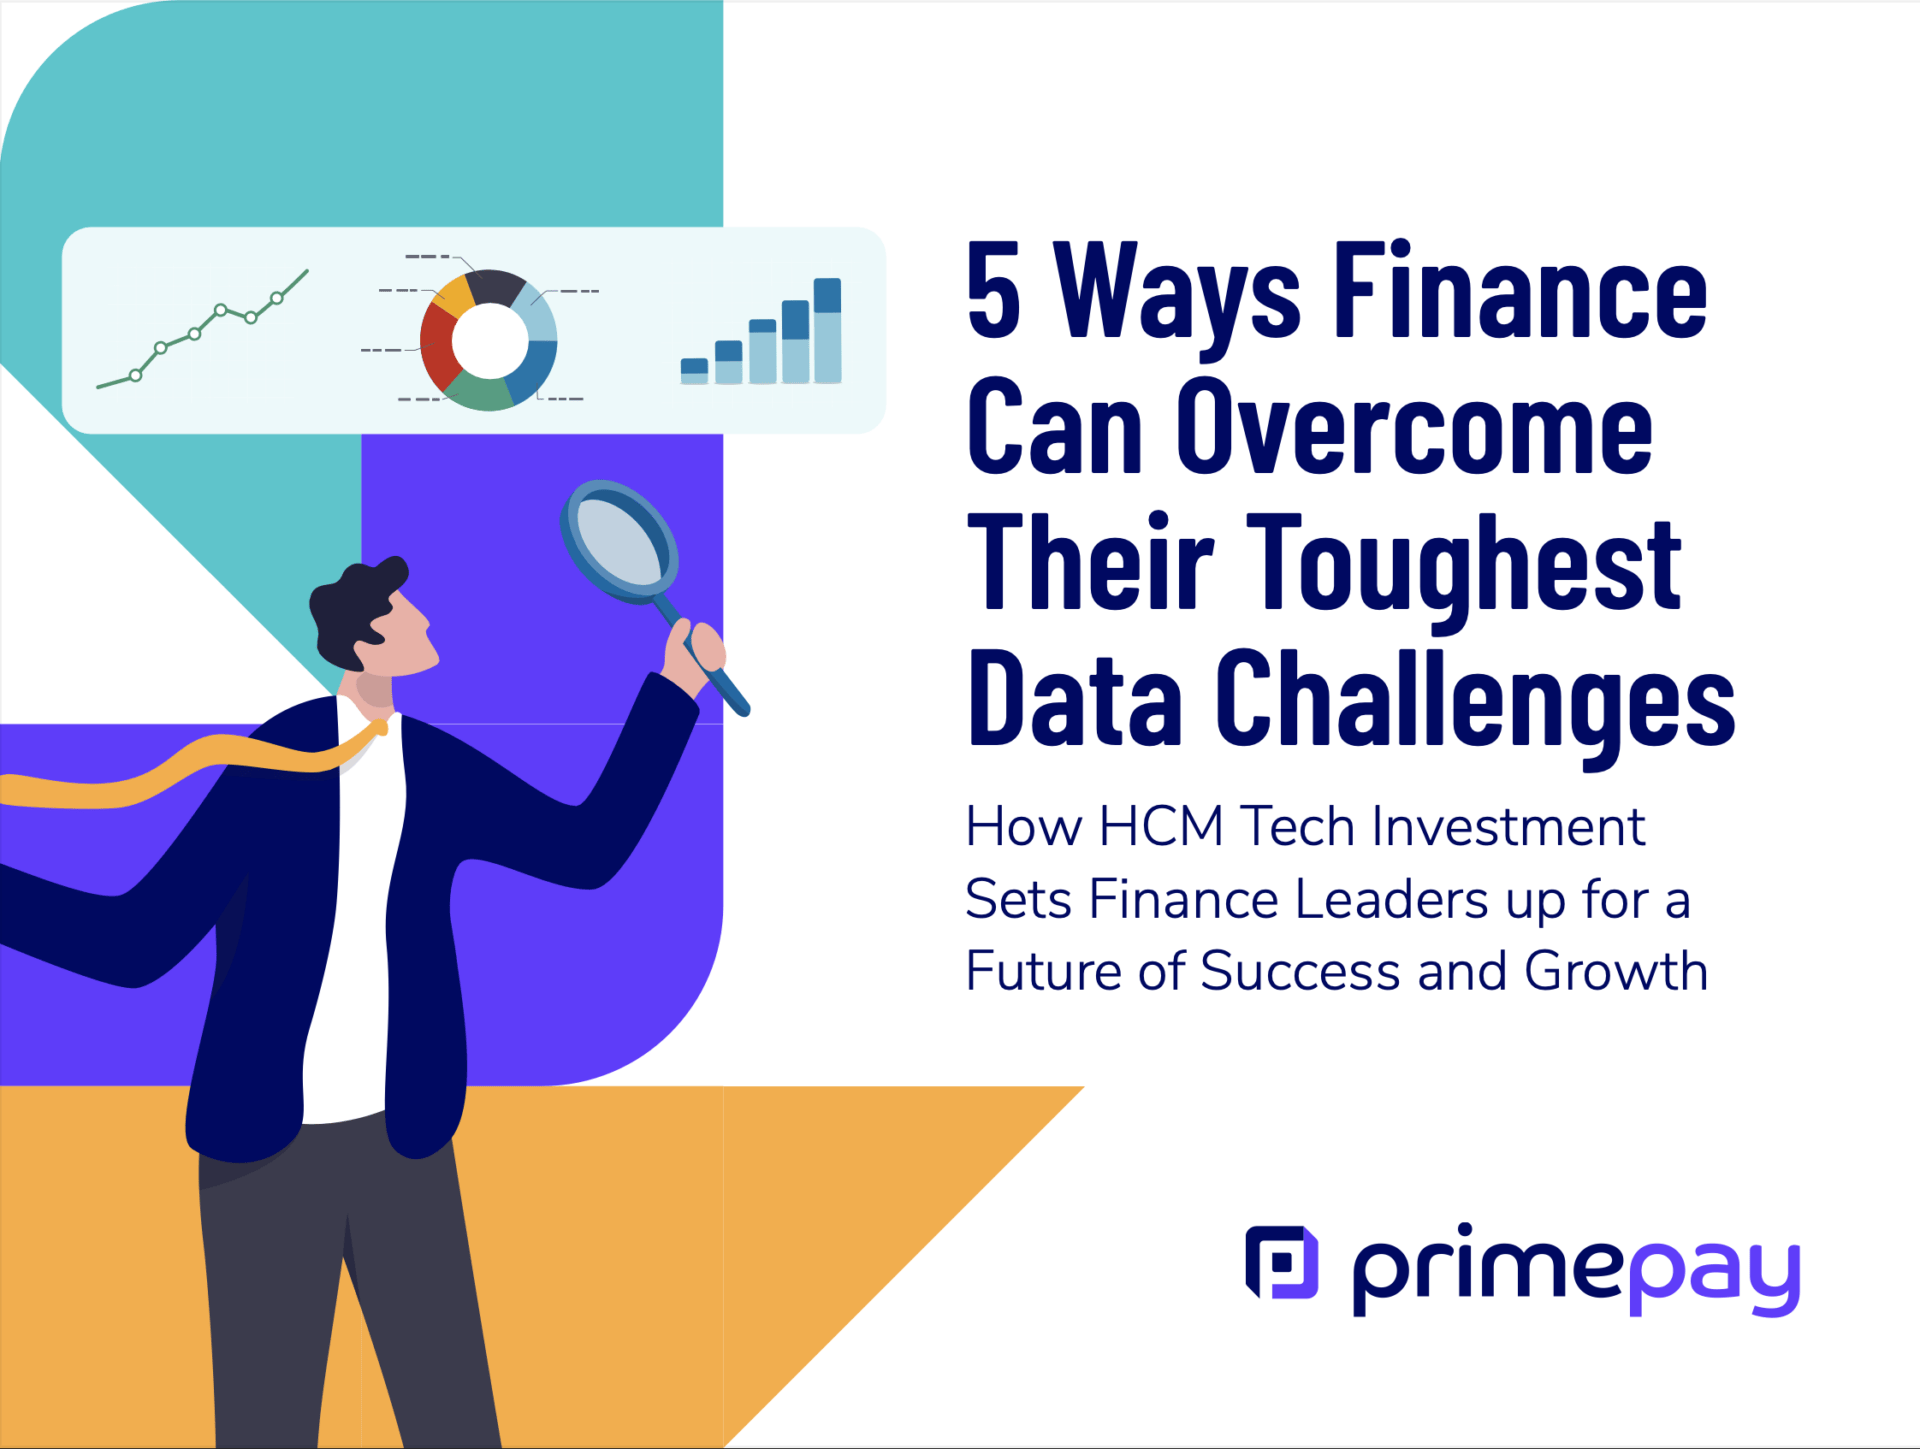 5 Ways Finance Can Overcome Their Toughest Data Challenges white paper cover image.